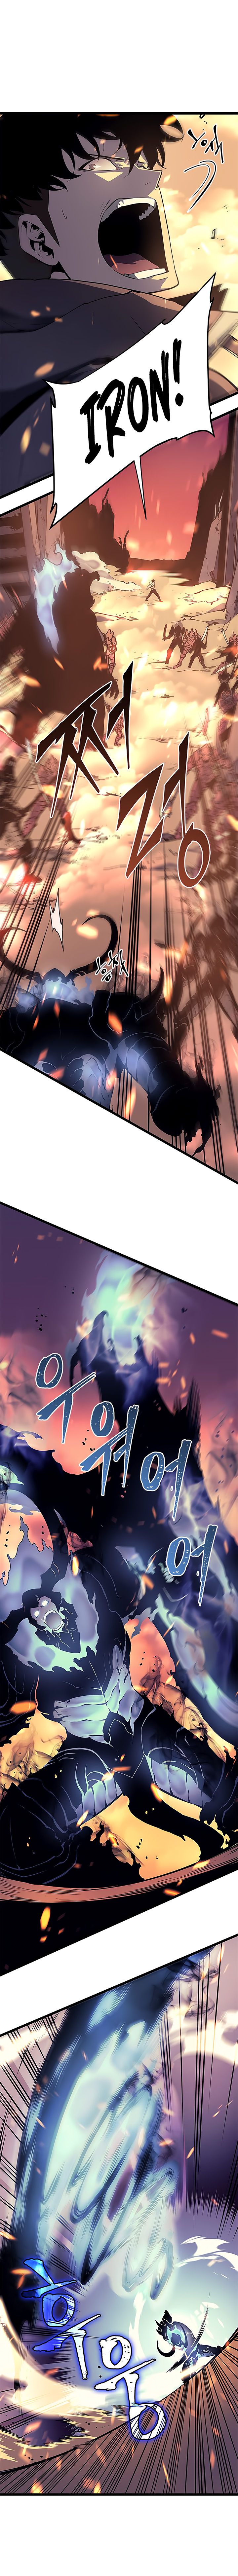 Solo Leveling Chapter 59 Page 6